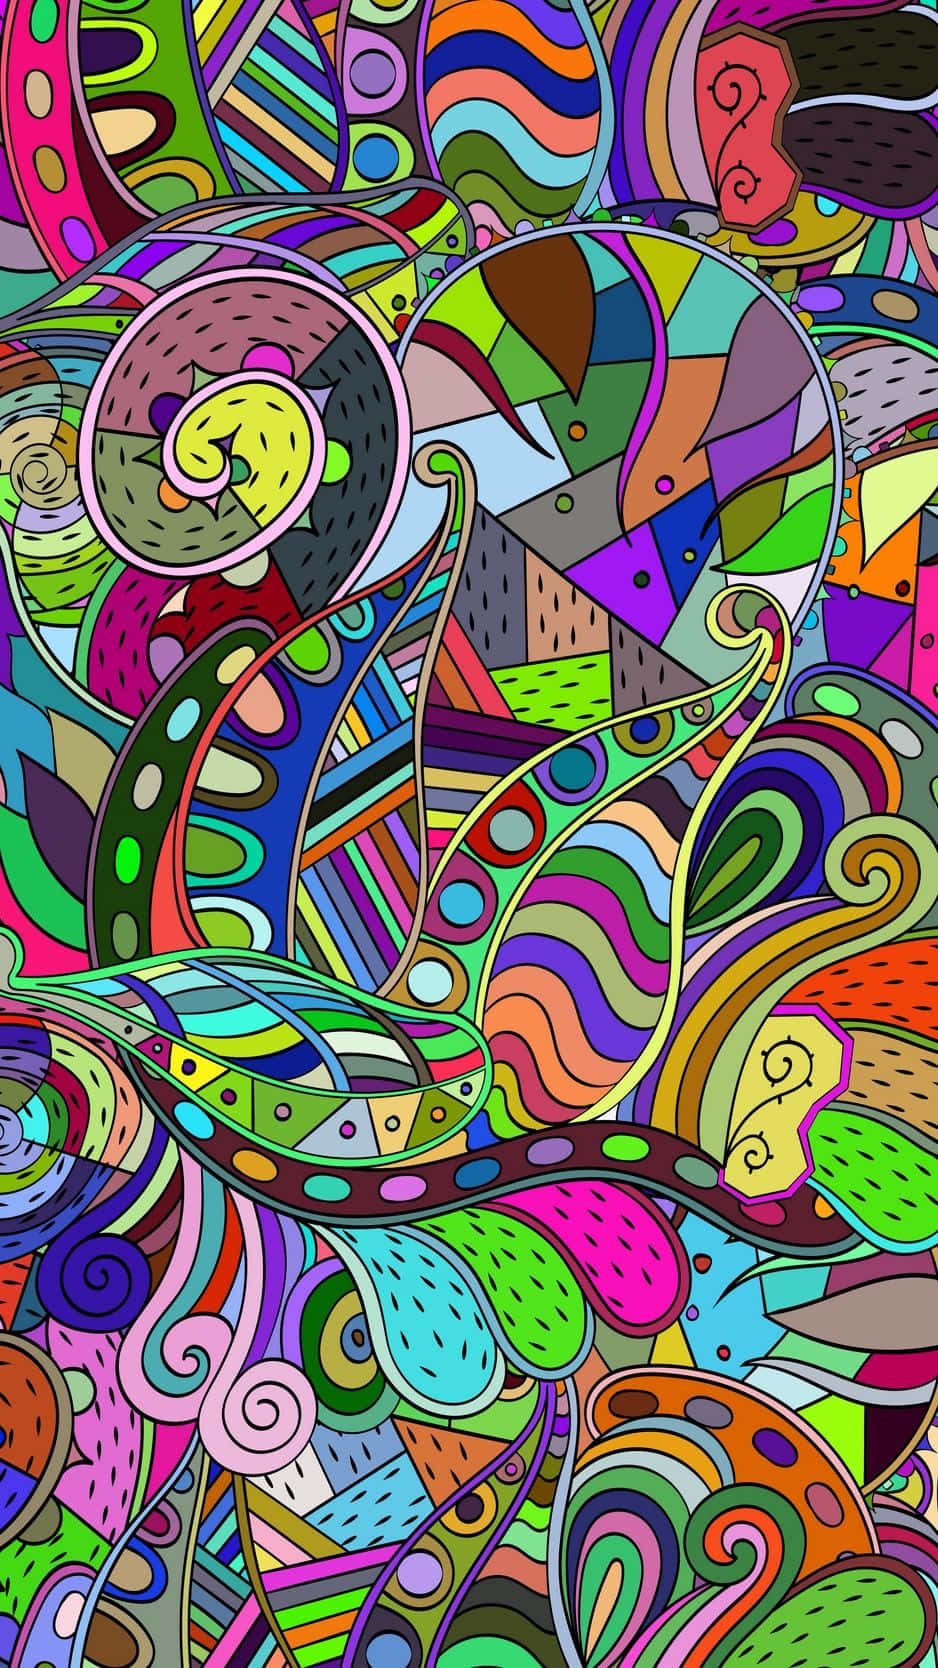 Customize Your Phone With A Fun And Colorful Iphone Wallpaper